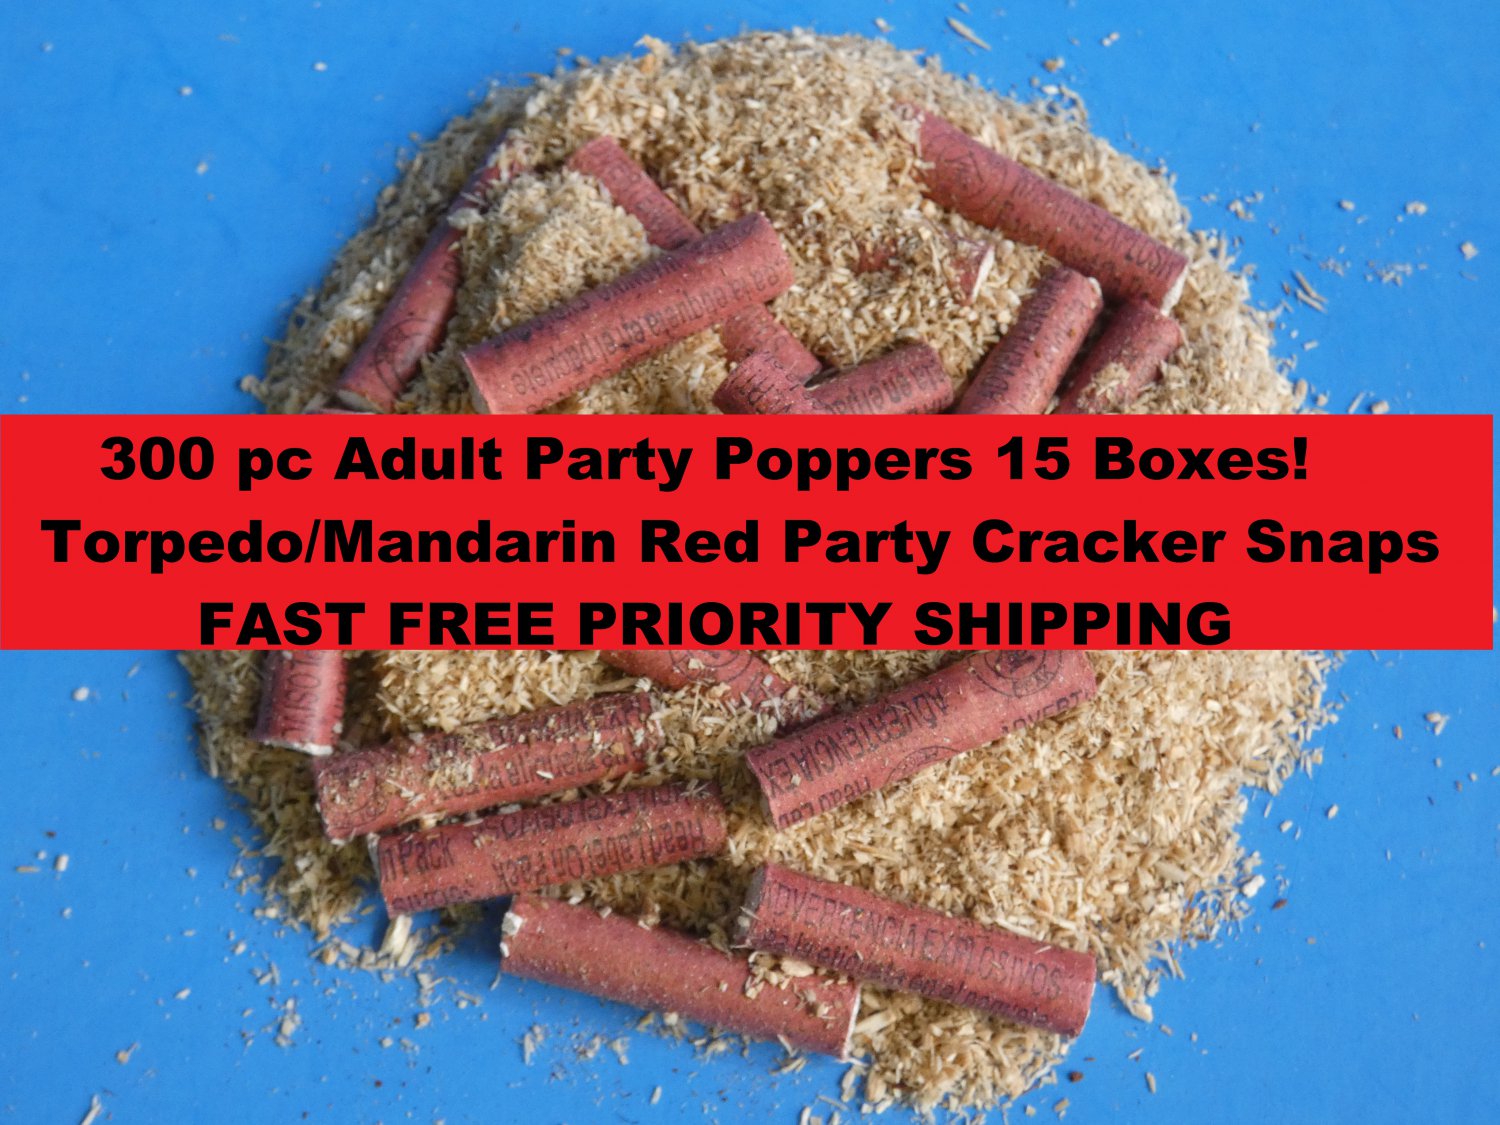 300 pc Adult Party Poppers 15 Boxes! Torpedo Mandarin Red Party Cracker Snaps FREE SHIP